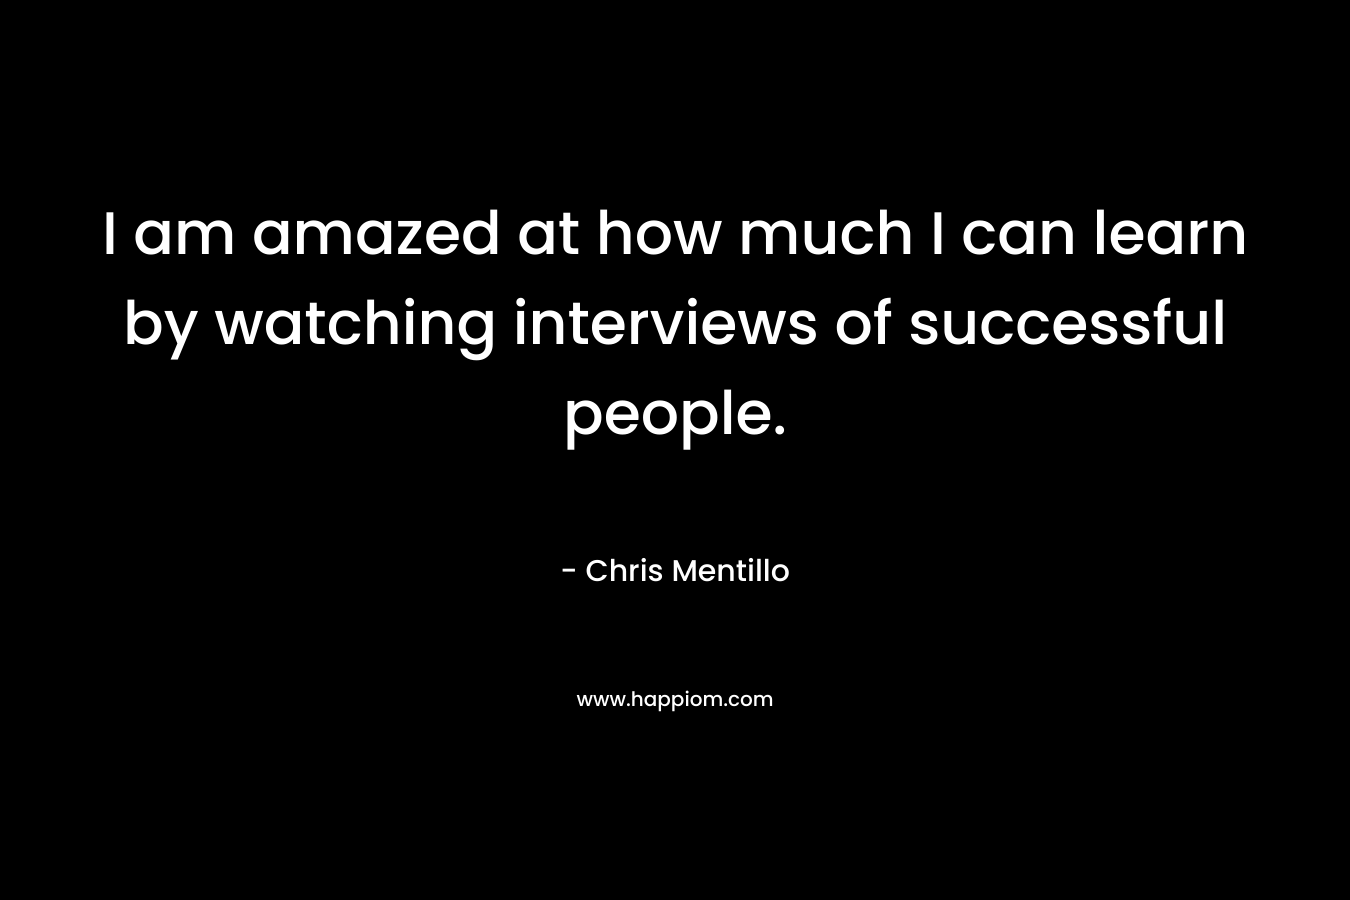 I am amazed at how much I can learn by watching interviews of successful people.